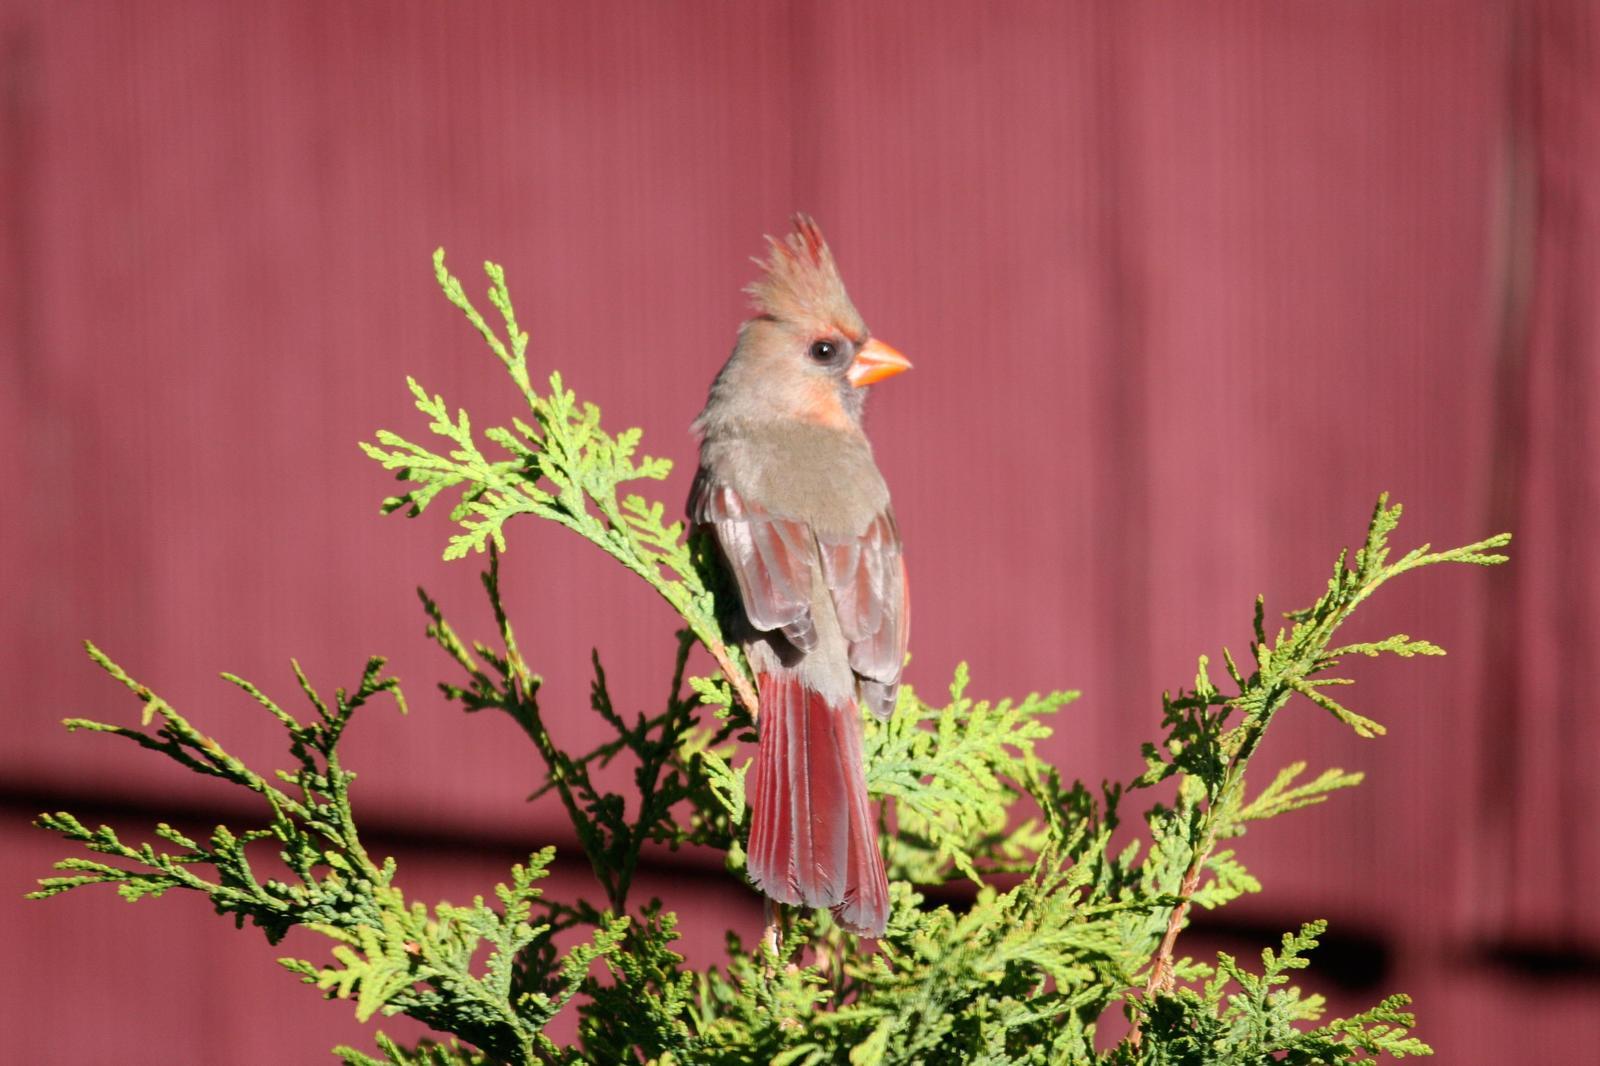 Northern Cardinal (Common) Photo by Roseanne CALECA